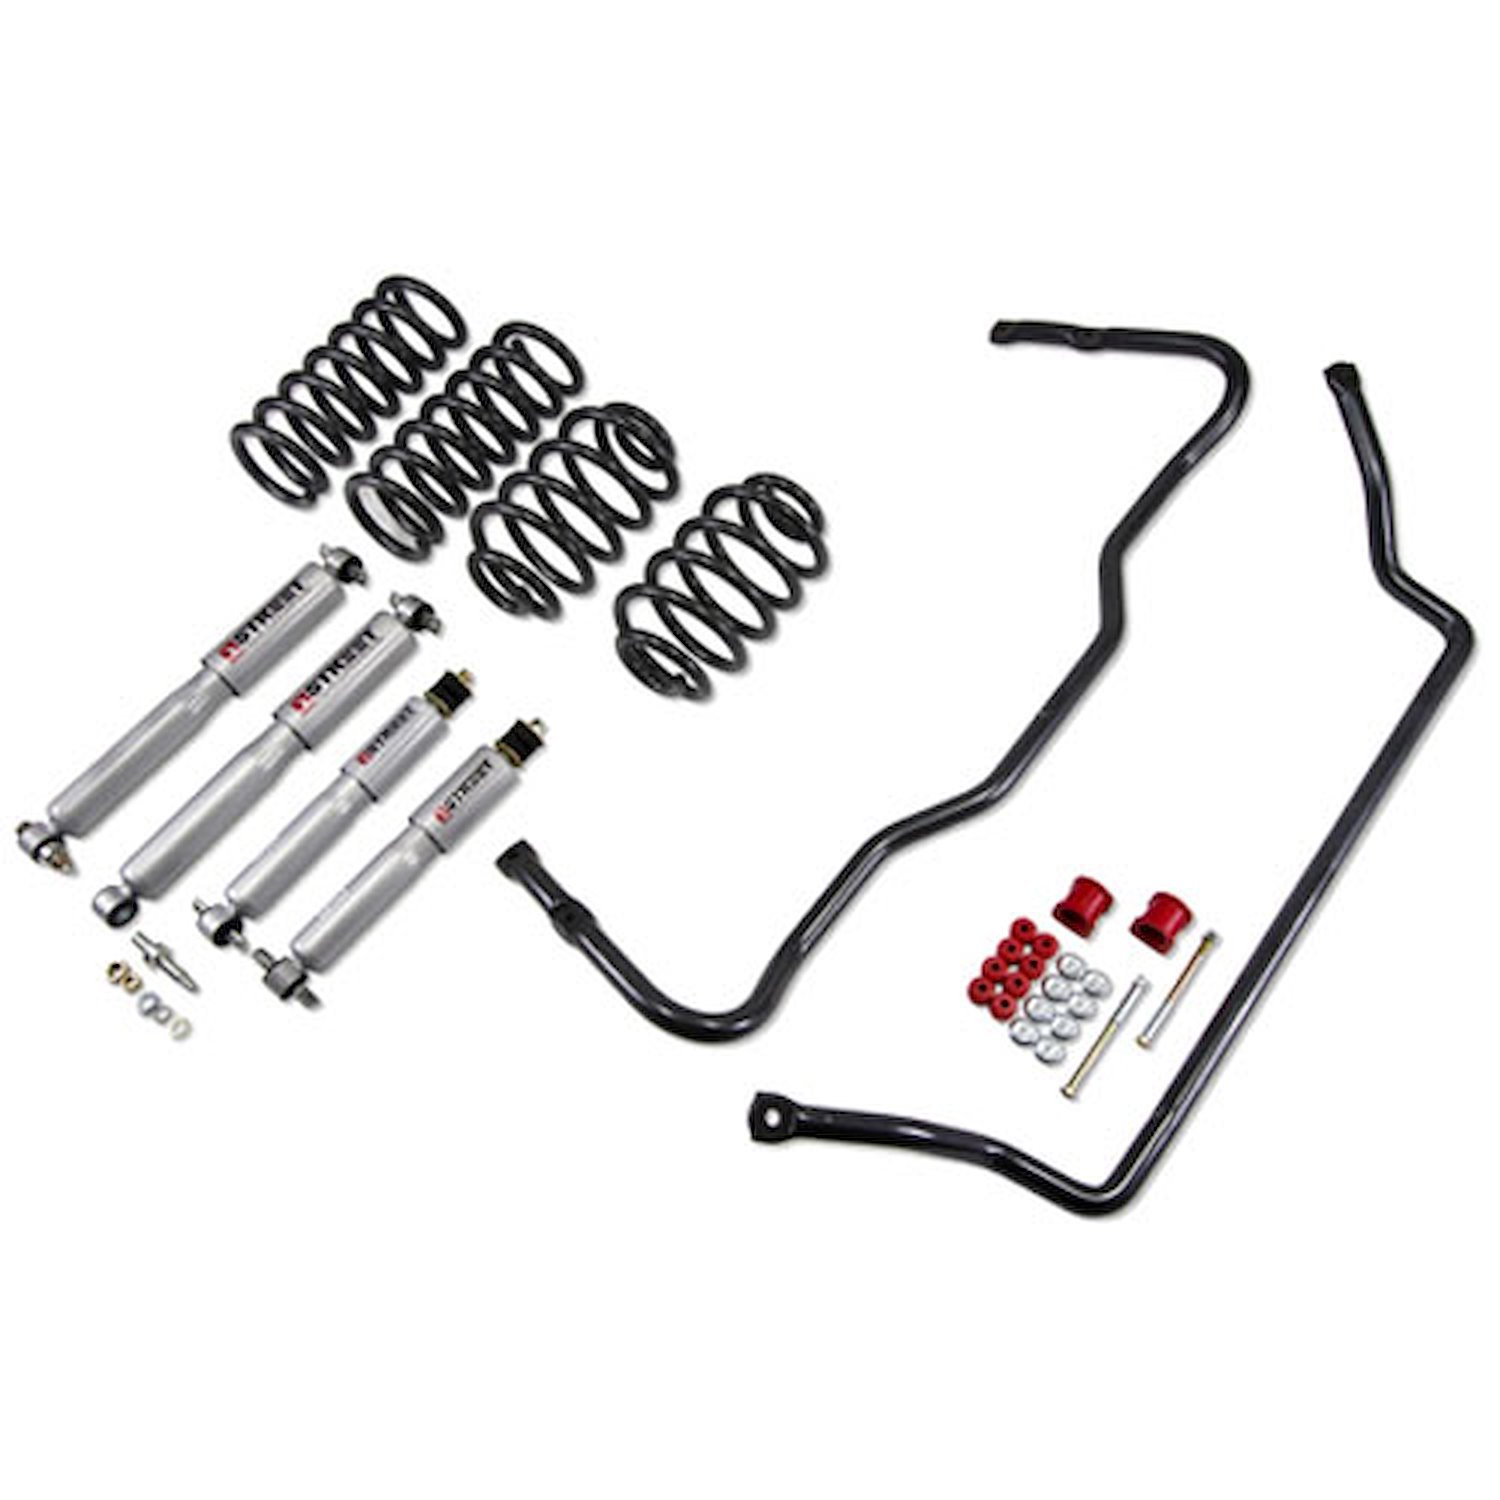 Muscle Car Suspension Kit for 1992-1996 GM B-Body